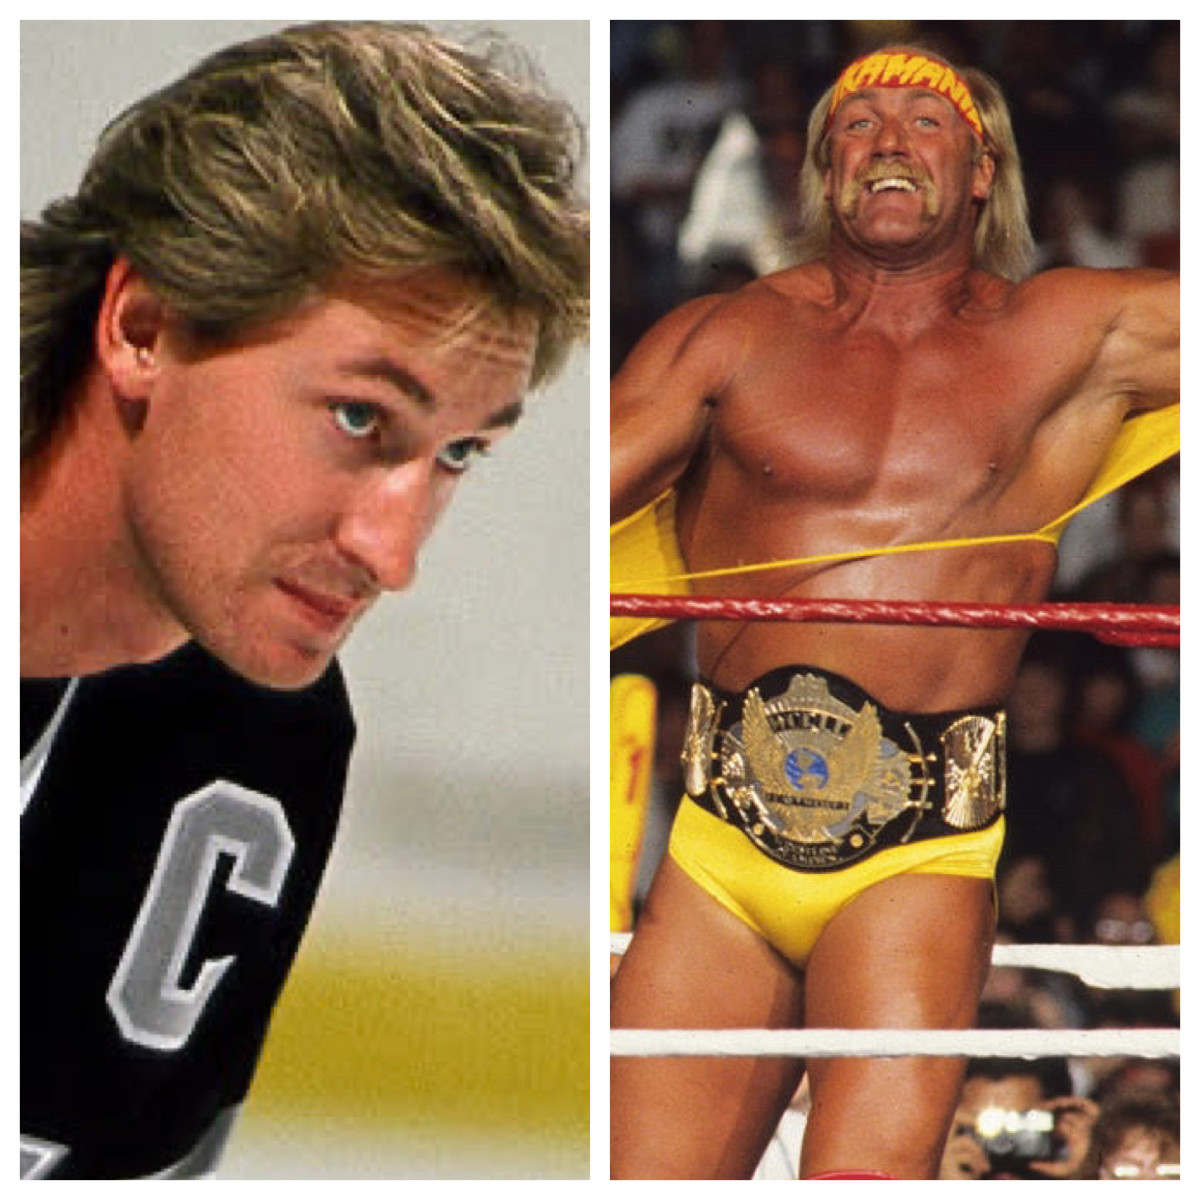 Wayne Gretzky and Hulk Hogan, two of the best ever at their craft